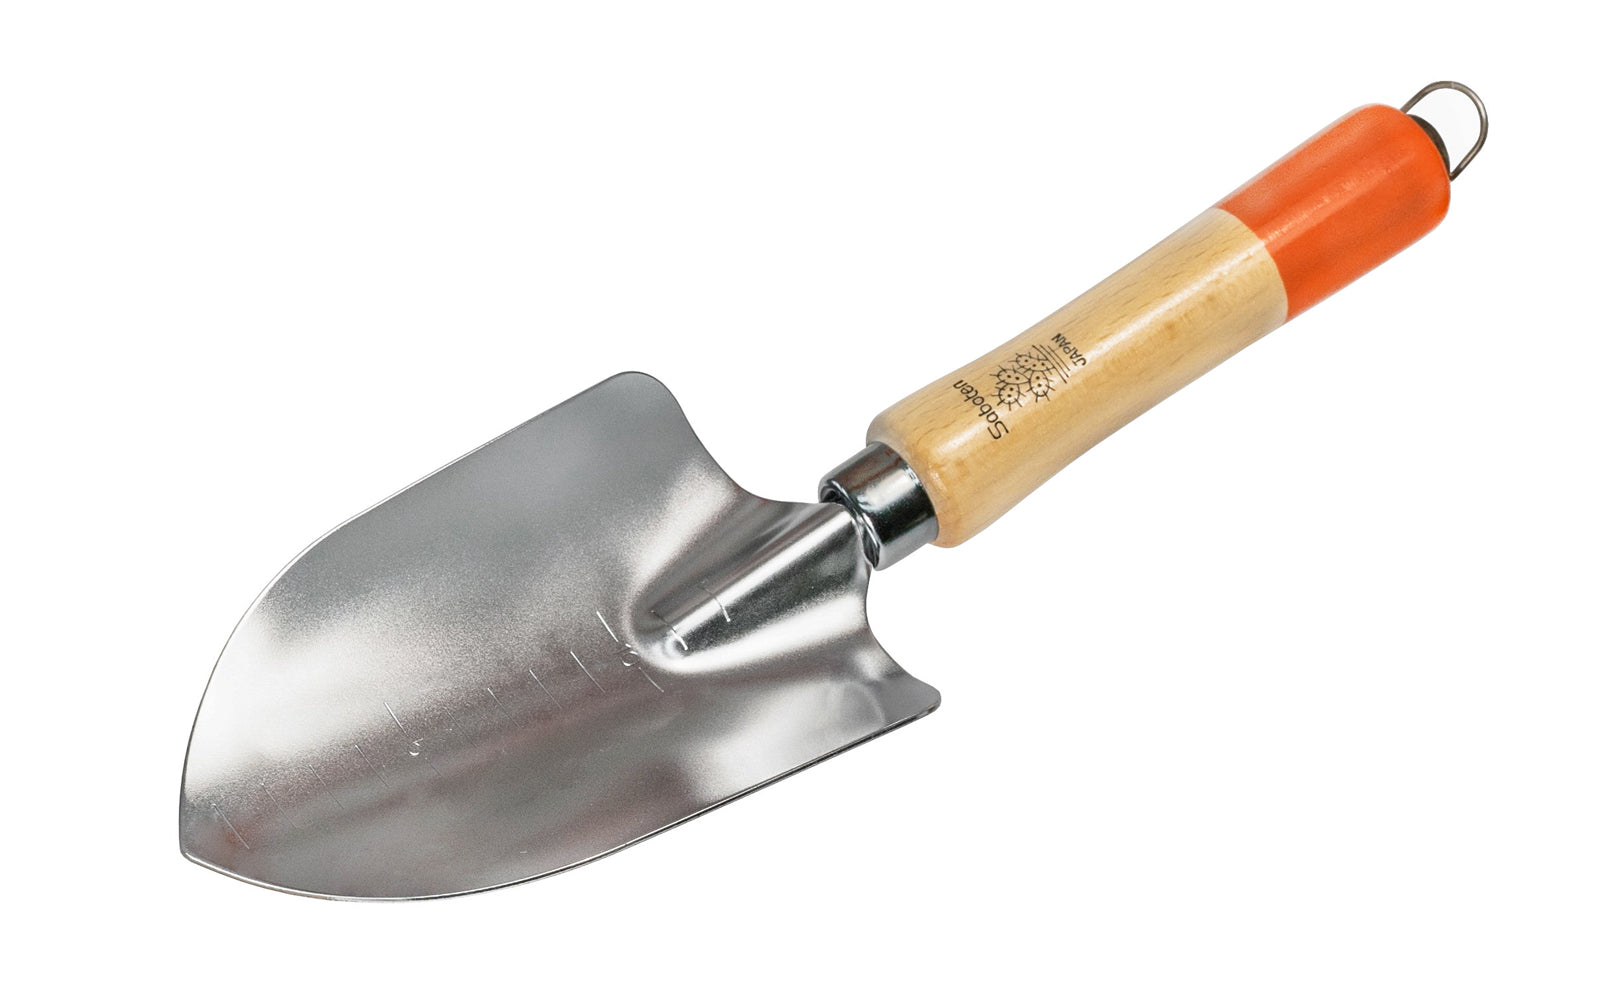 Japanese Saboten Transplanting Garden Trowel ~ Model 510A ~ Made in Japan · Model 510A ~ Made of carbon steel material ~ Three layer plated finish for rust resistance ~ Bulb plating scale on blade ~ Lacquered hardwood handle ~ Patented re-inforced joint part between blade & handle for toughness - shovel - trowel - spade